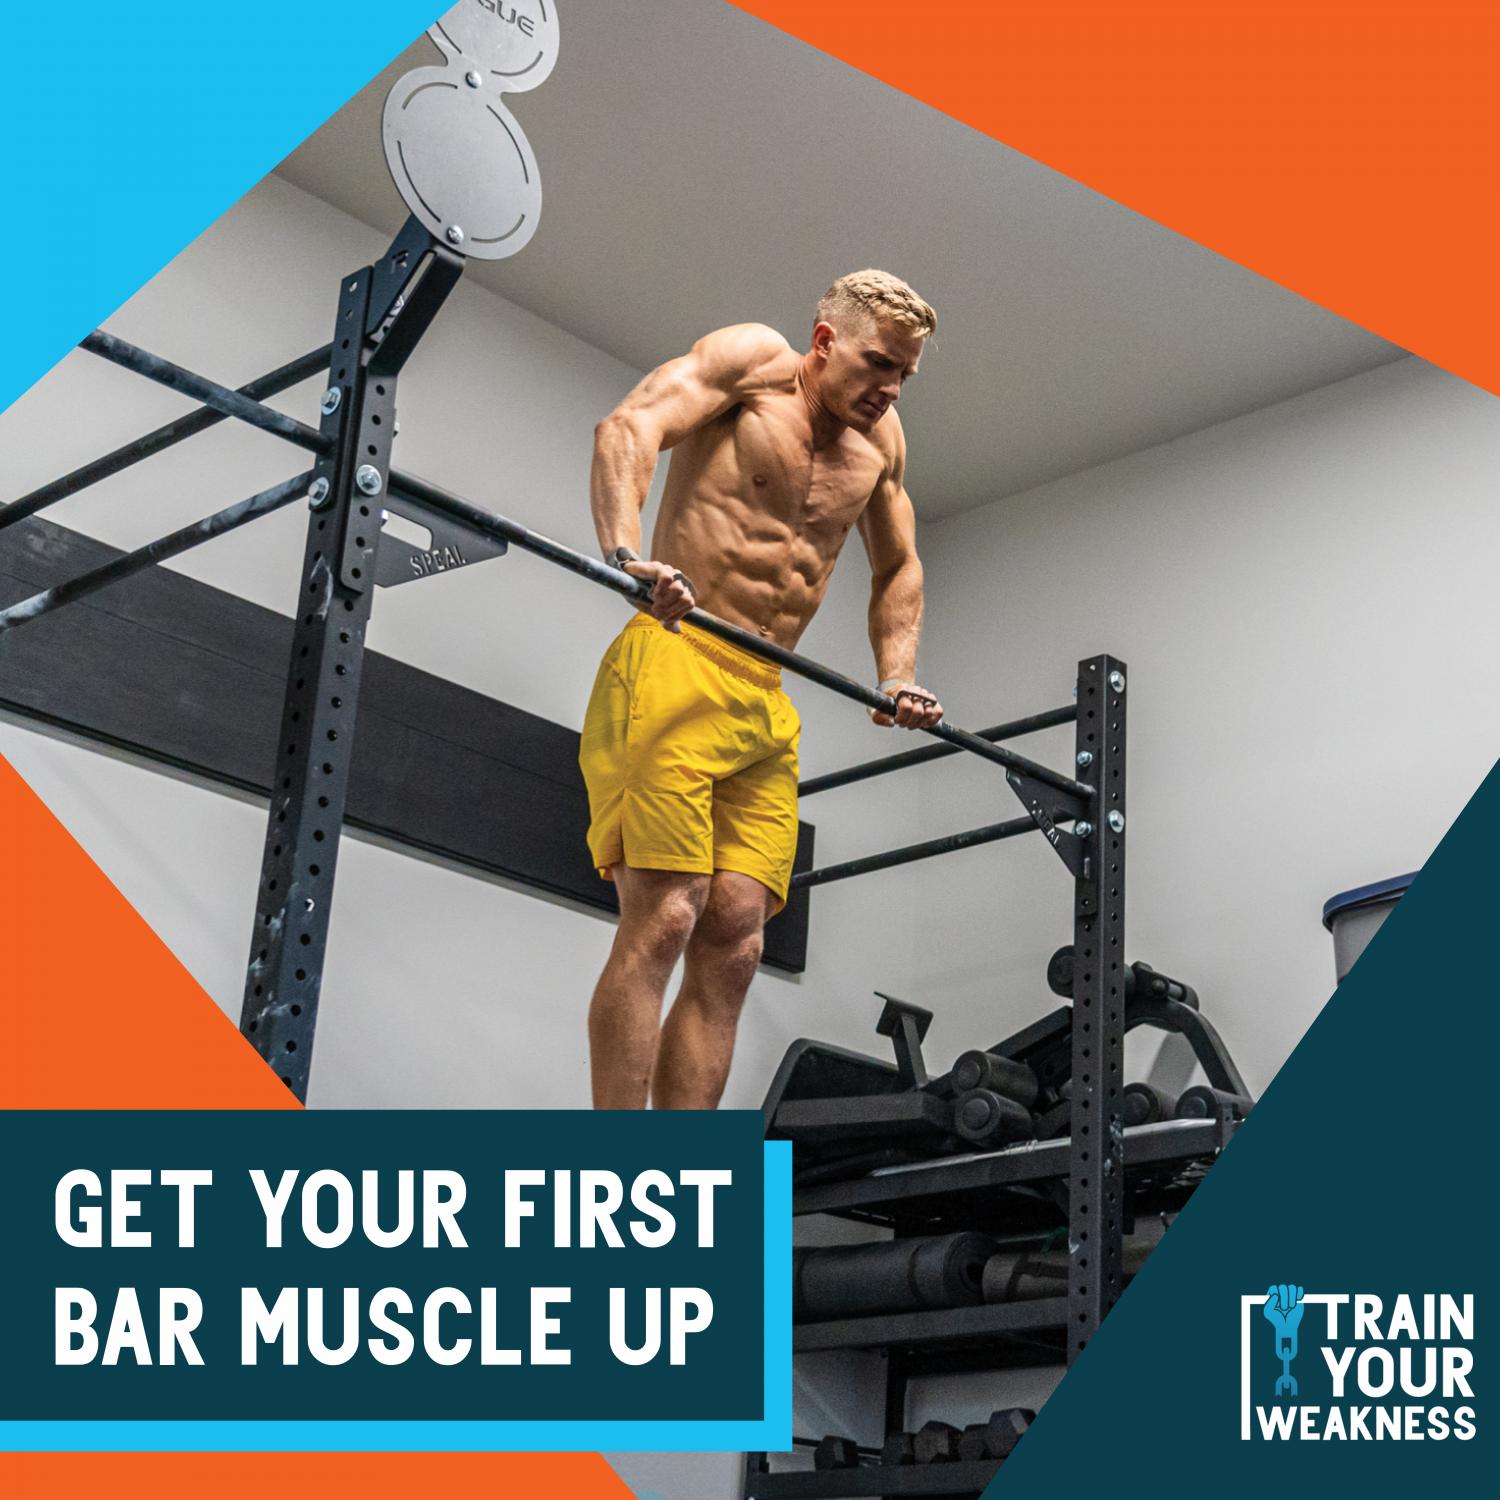 Get Your First Bar Muscle Up